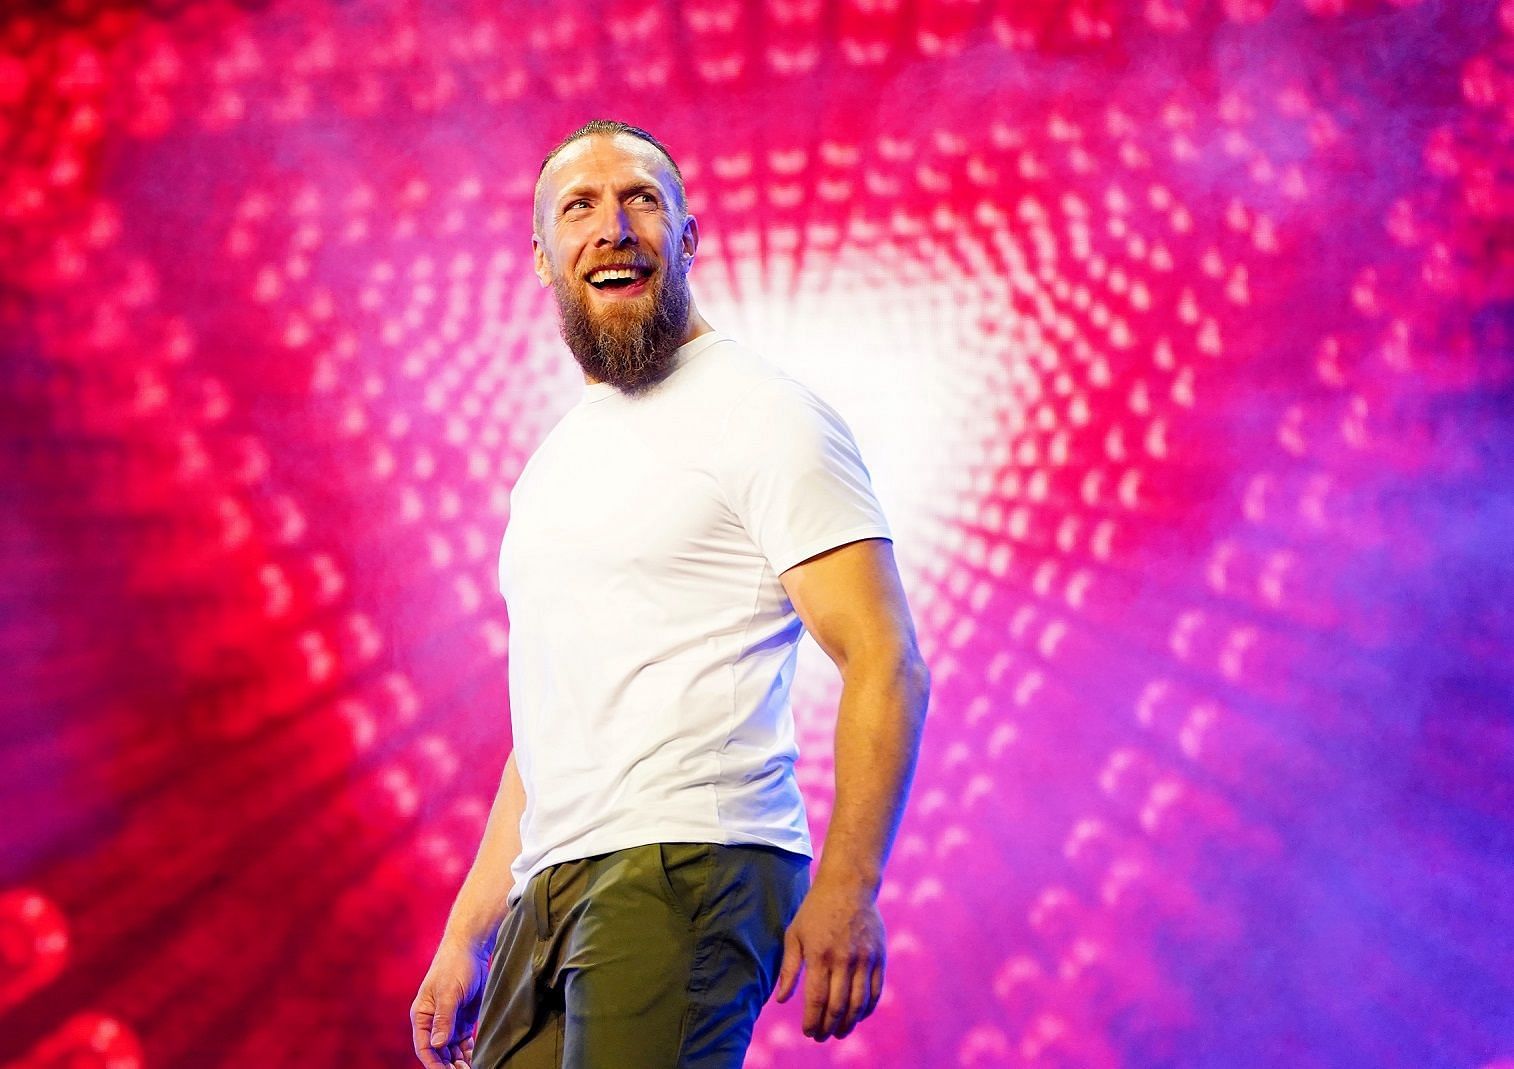 Bryan Danielson has made a big impact on his AEW debut